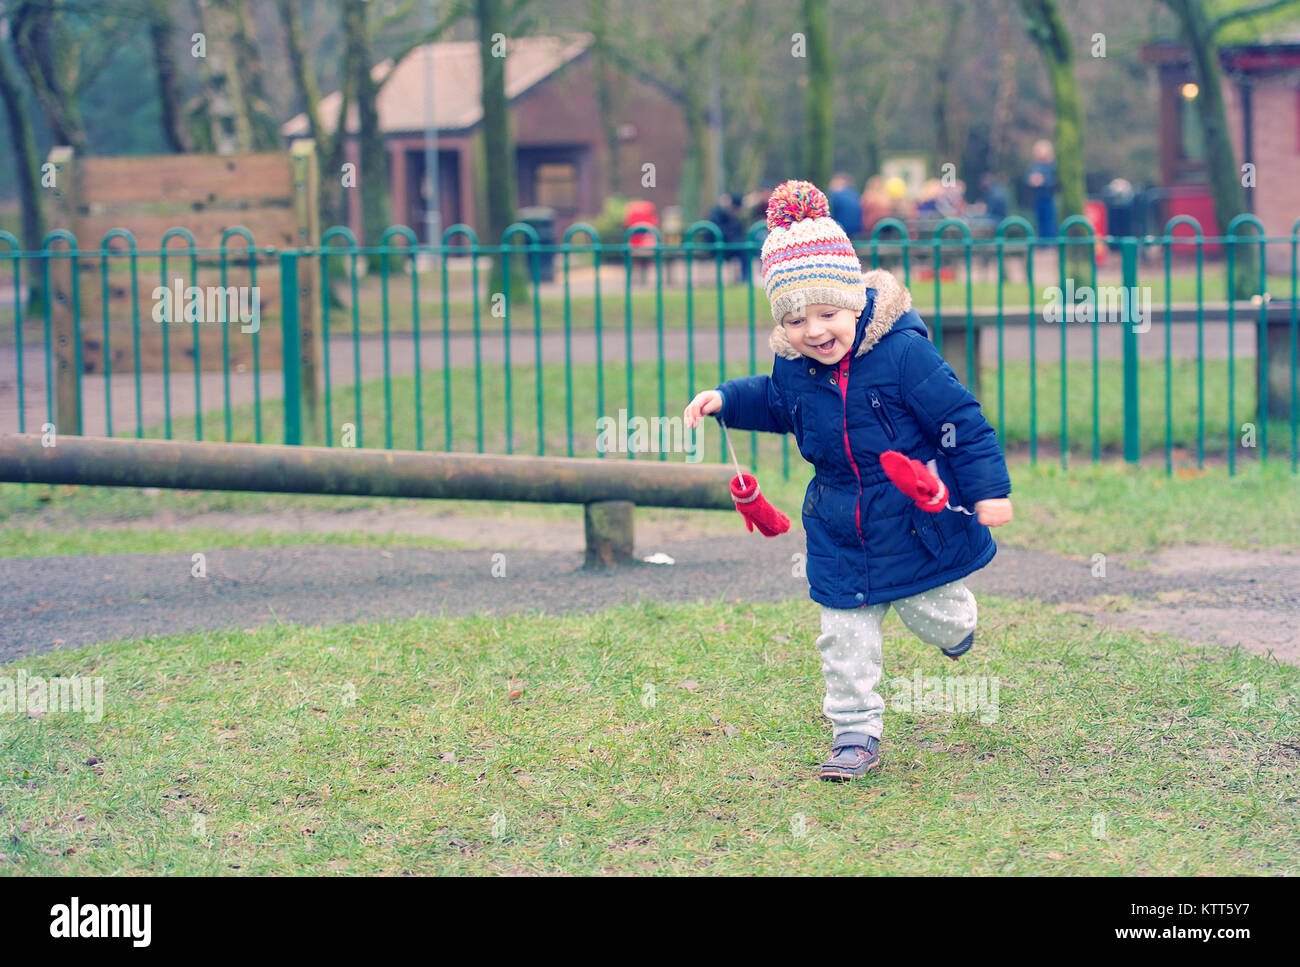 Girl running in a public park Stock Photo